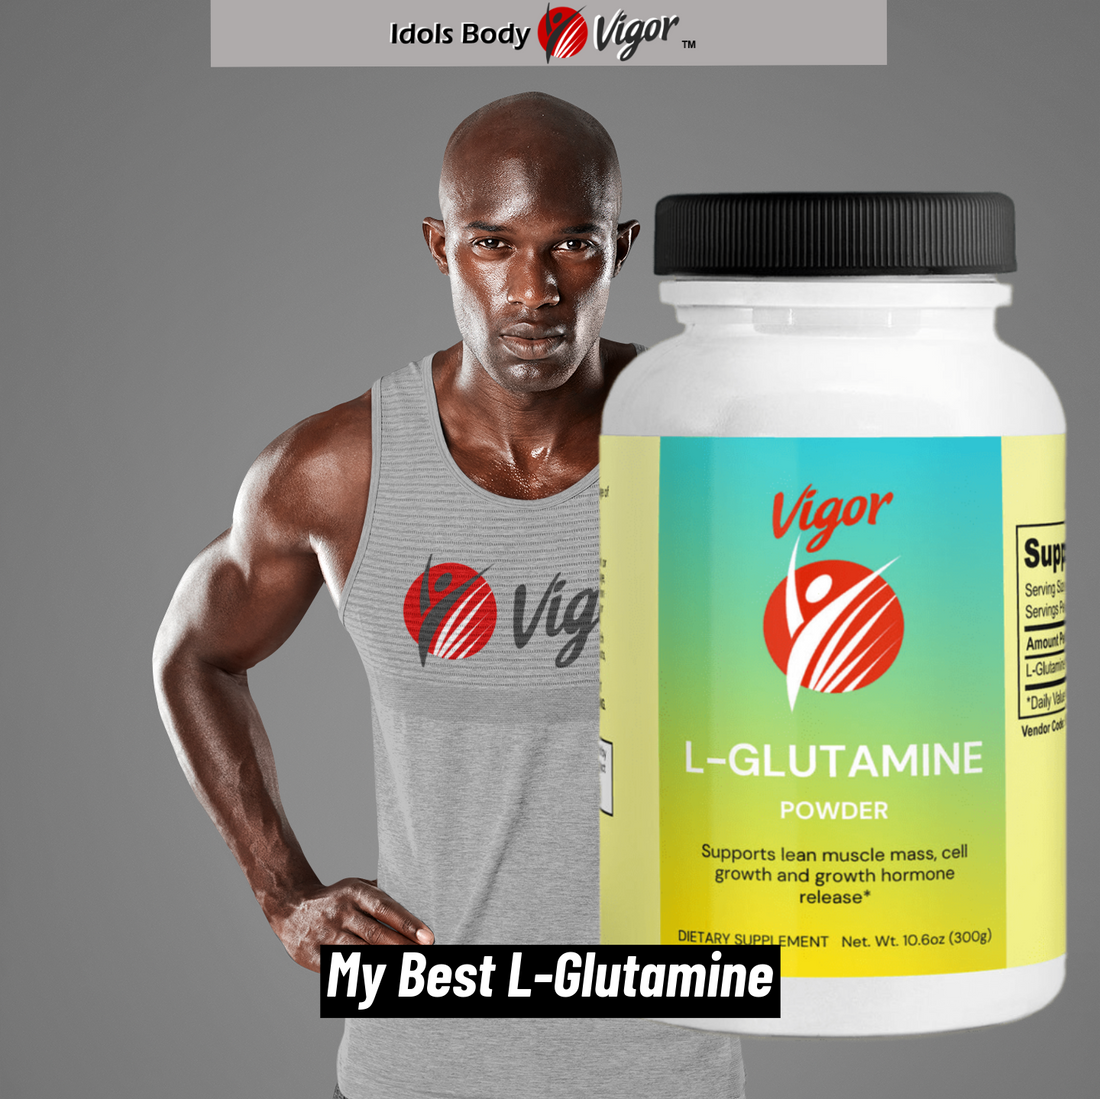 Is L-Glutamine for Athletes and Fitness Enthusiasts Only